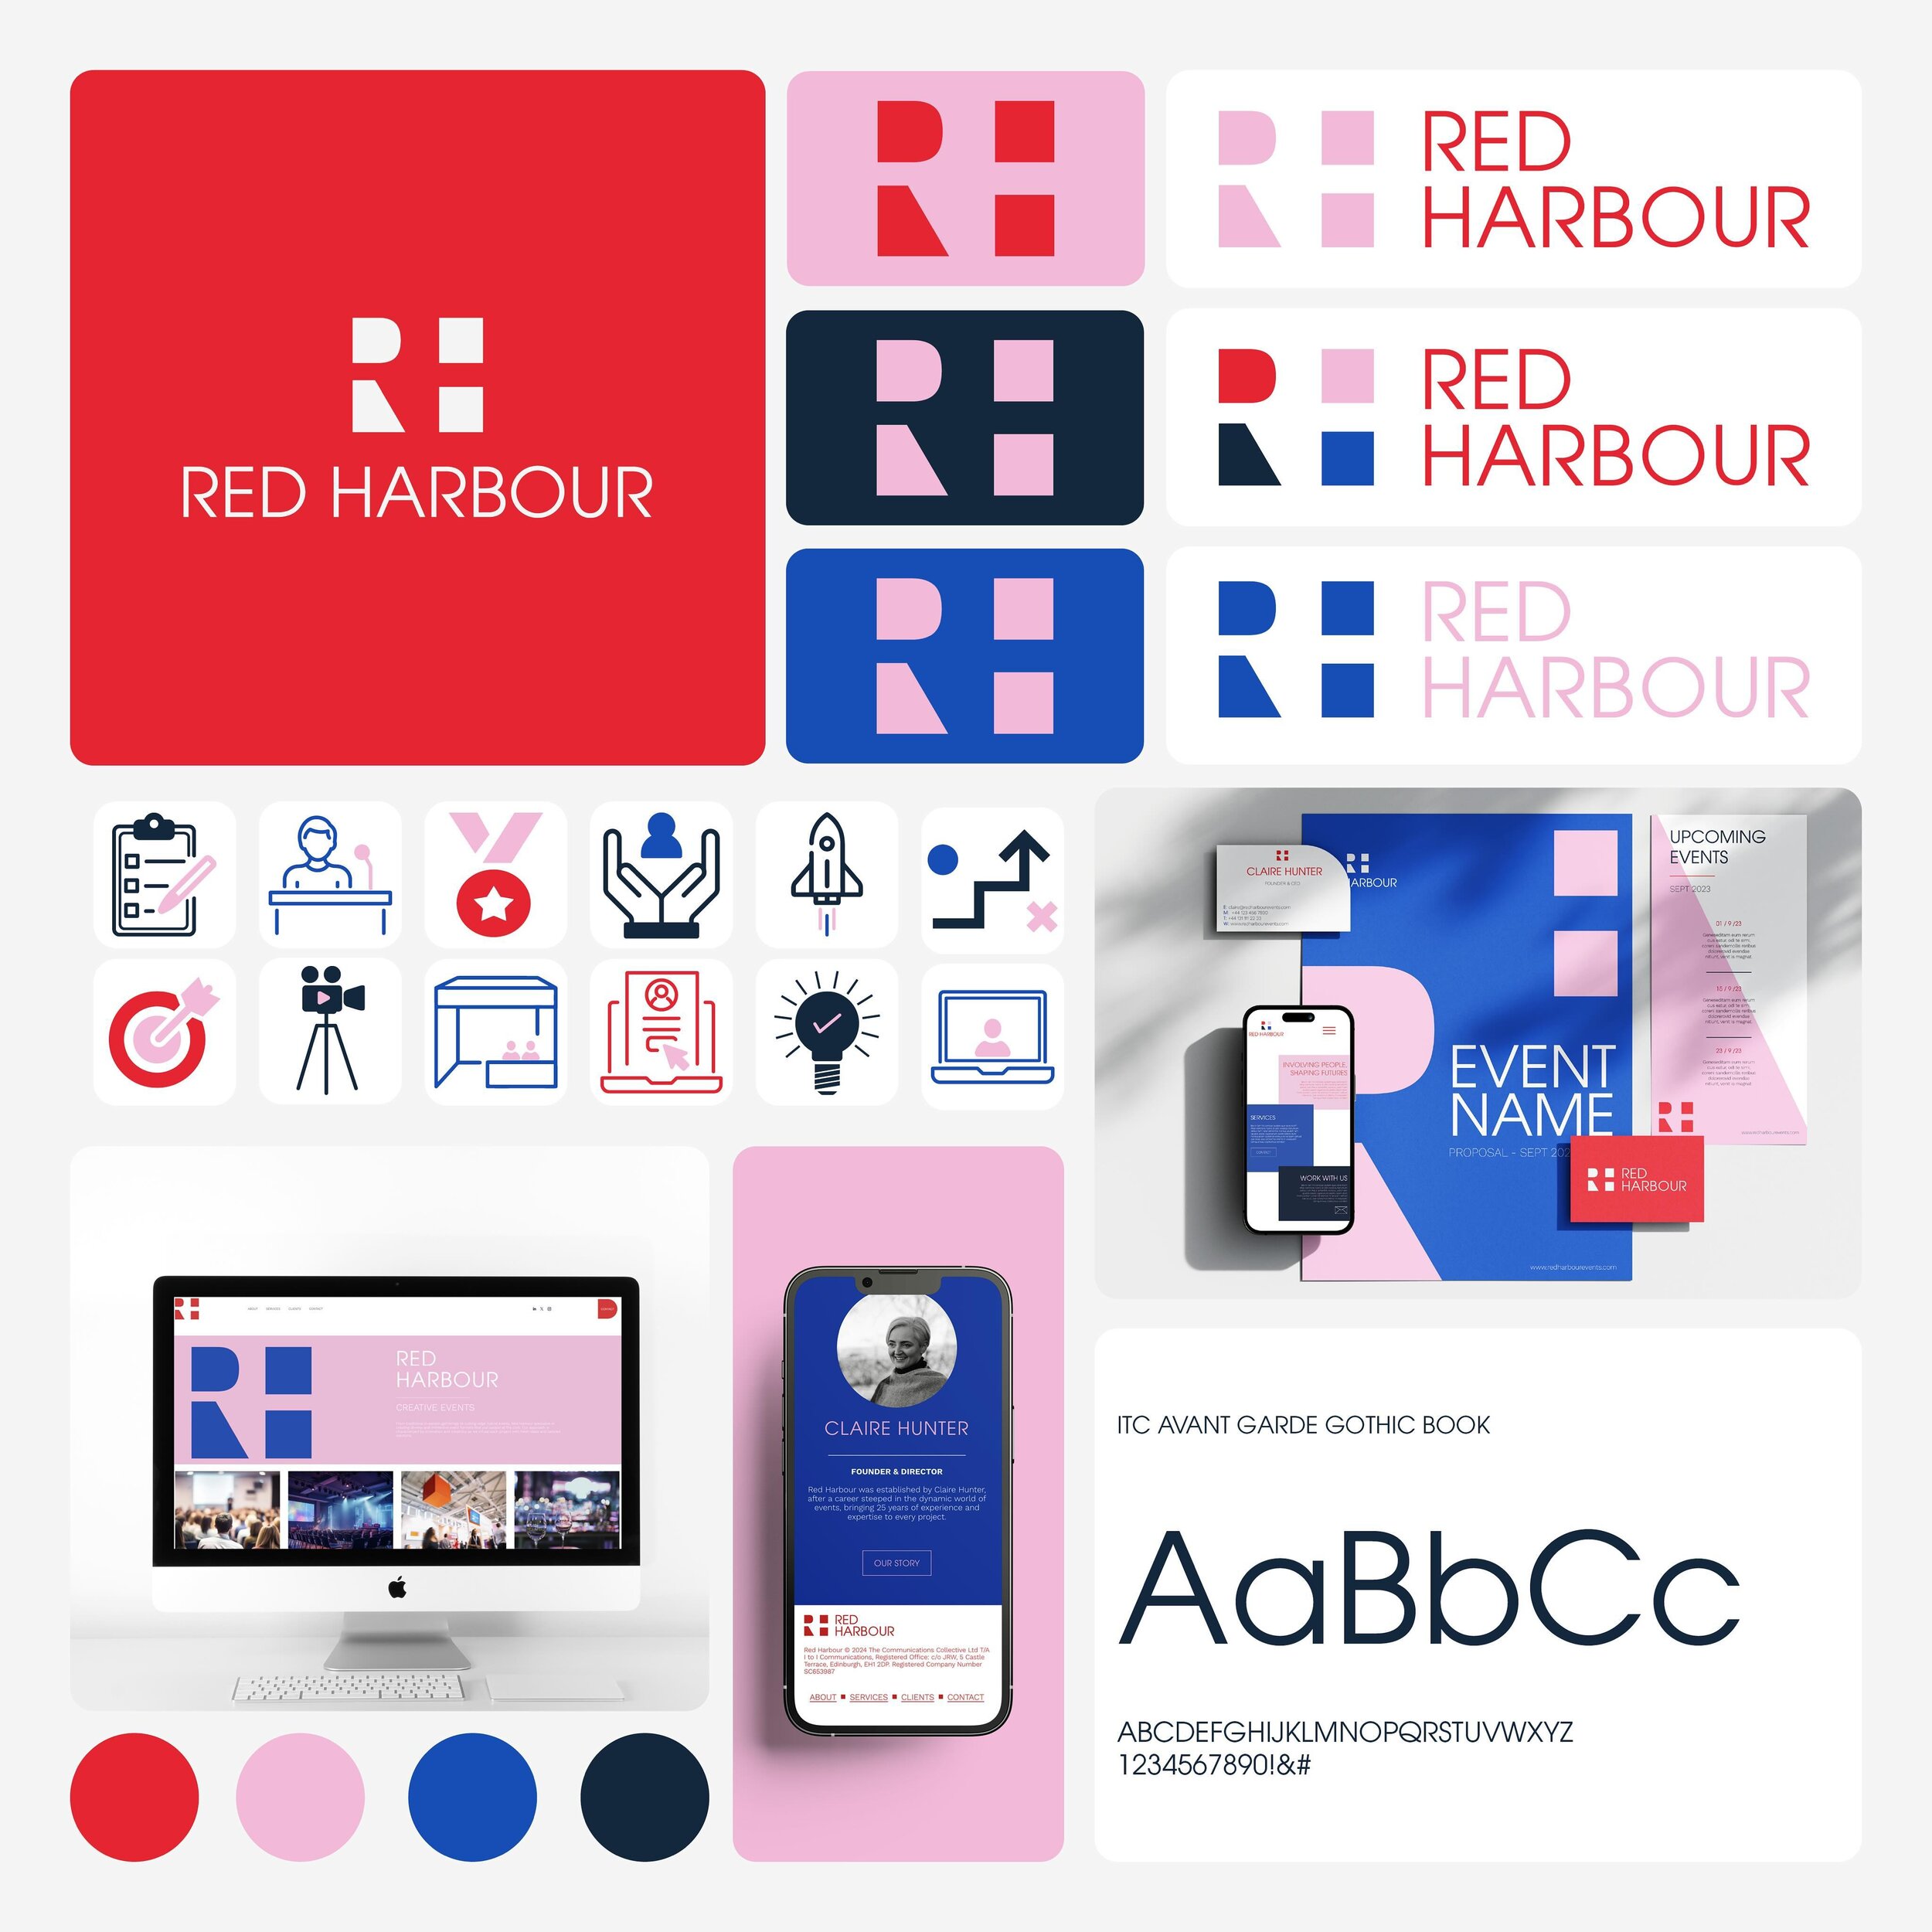 You don&rsquo;t need a logo you need a brand 

➕ logo 
➕ logo variations
➕ colour palette
➕ typography 
➕ brand styling &amp; tone
➕ icons
➕ patterns

If you invest in this then you will have all the tools you need to successfully and consistently co